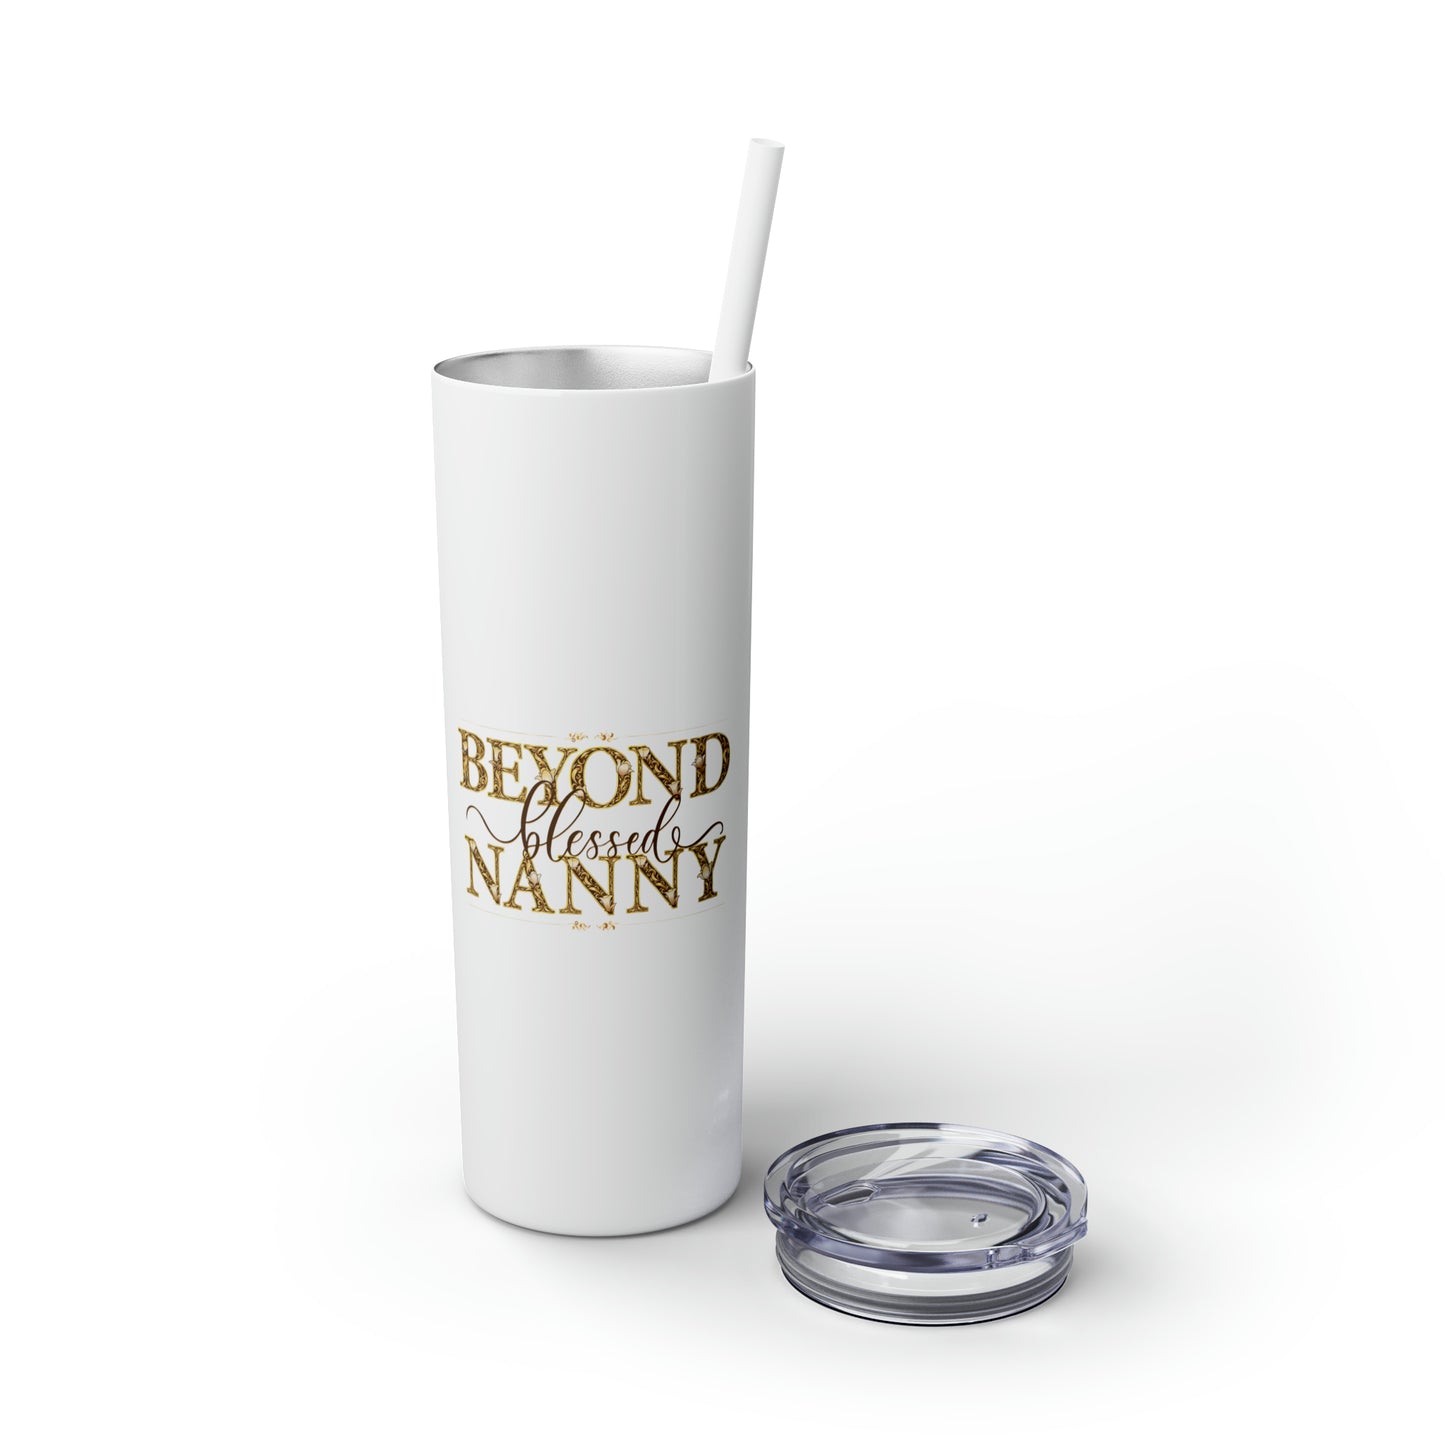 Beyond Blessed Nanny - Brown - Skinny Tumbler with Straw, 20oz